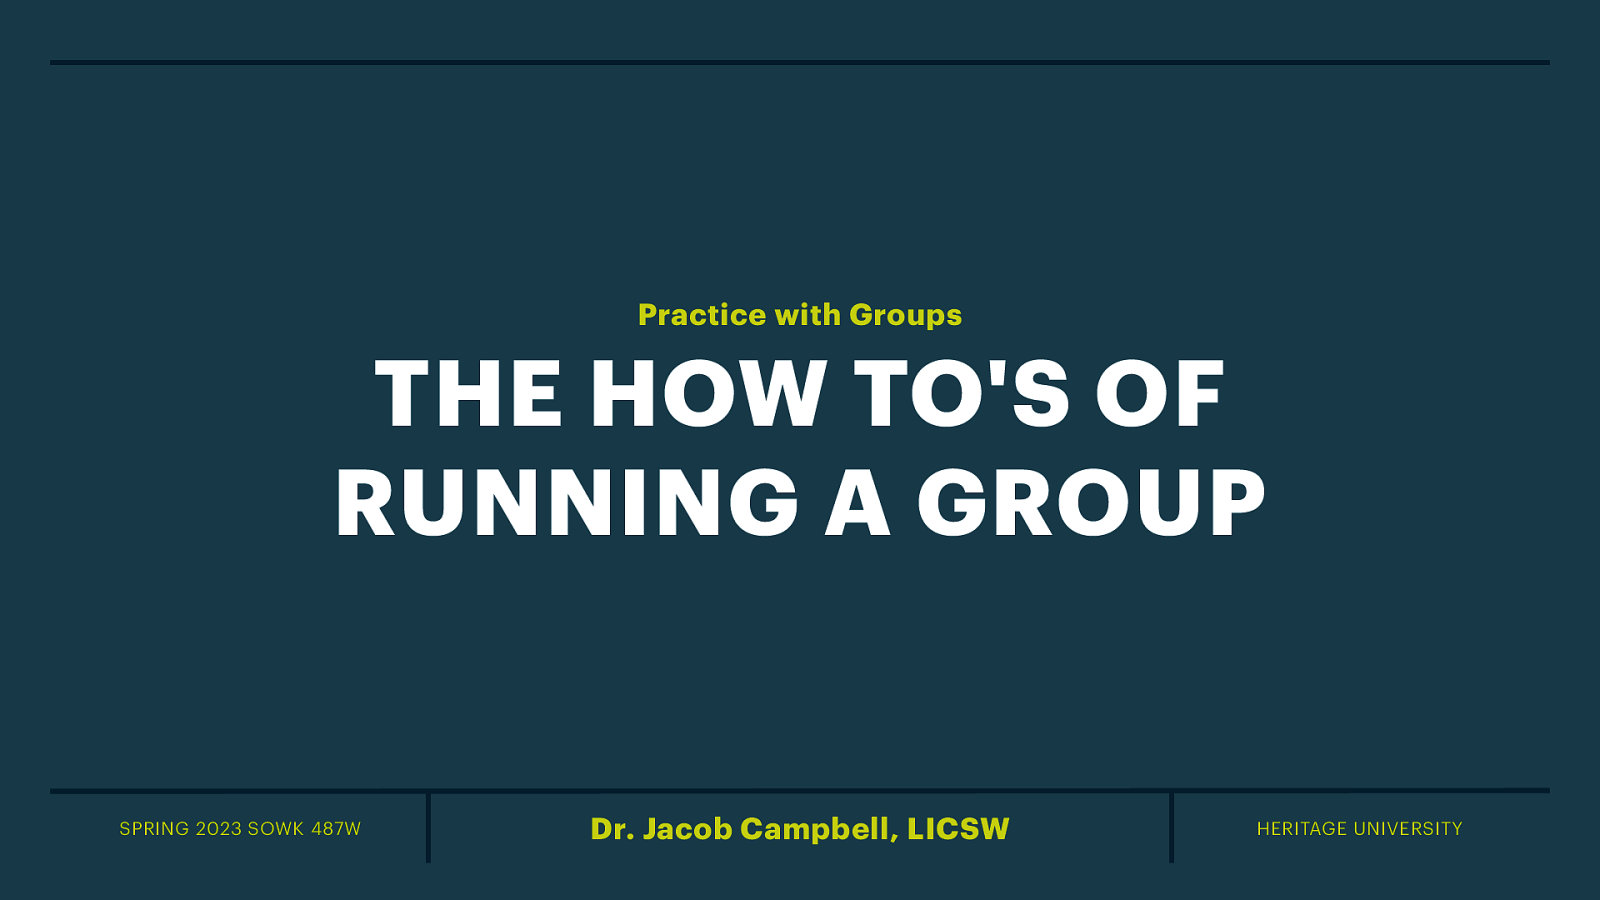 Spring 2023 SOWK 487 Week 12 - The How To’s of Running a Group